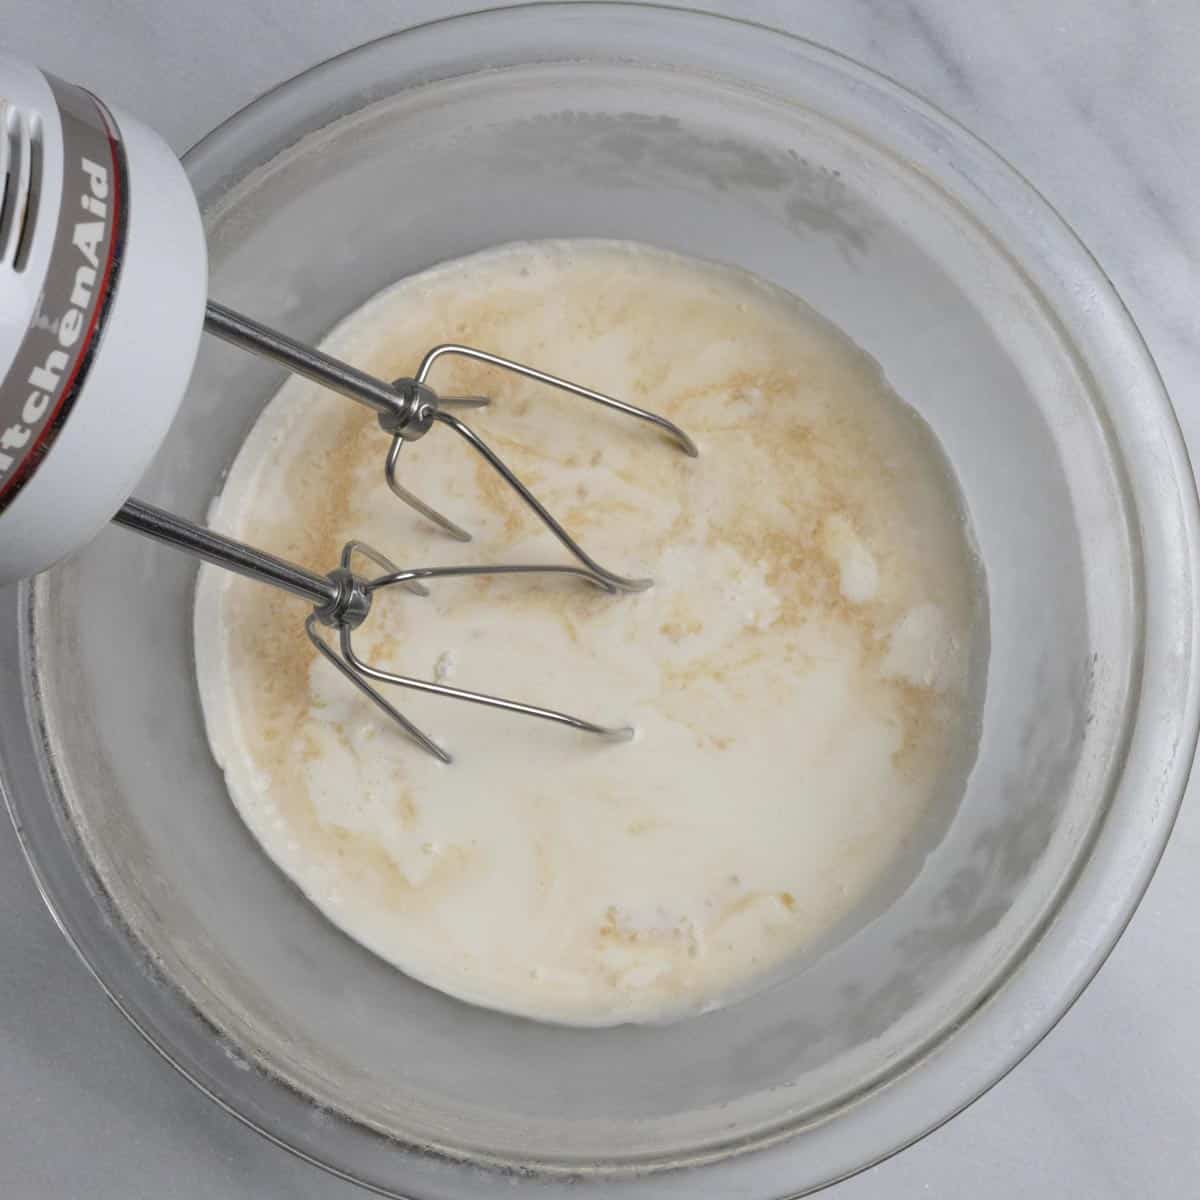 Clear bowl of keto whipped cream ingredients with hand mixer blades in the bowl ready to mix.